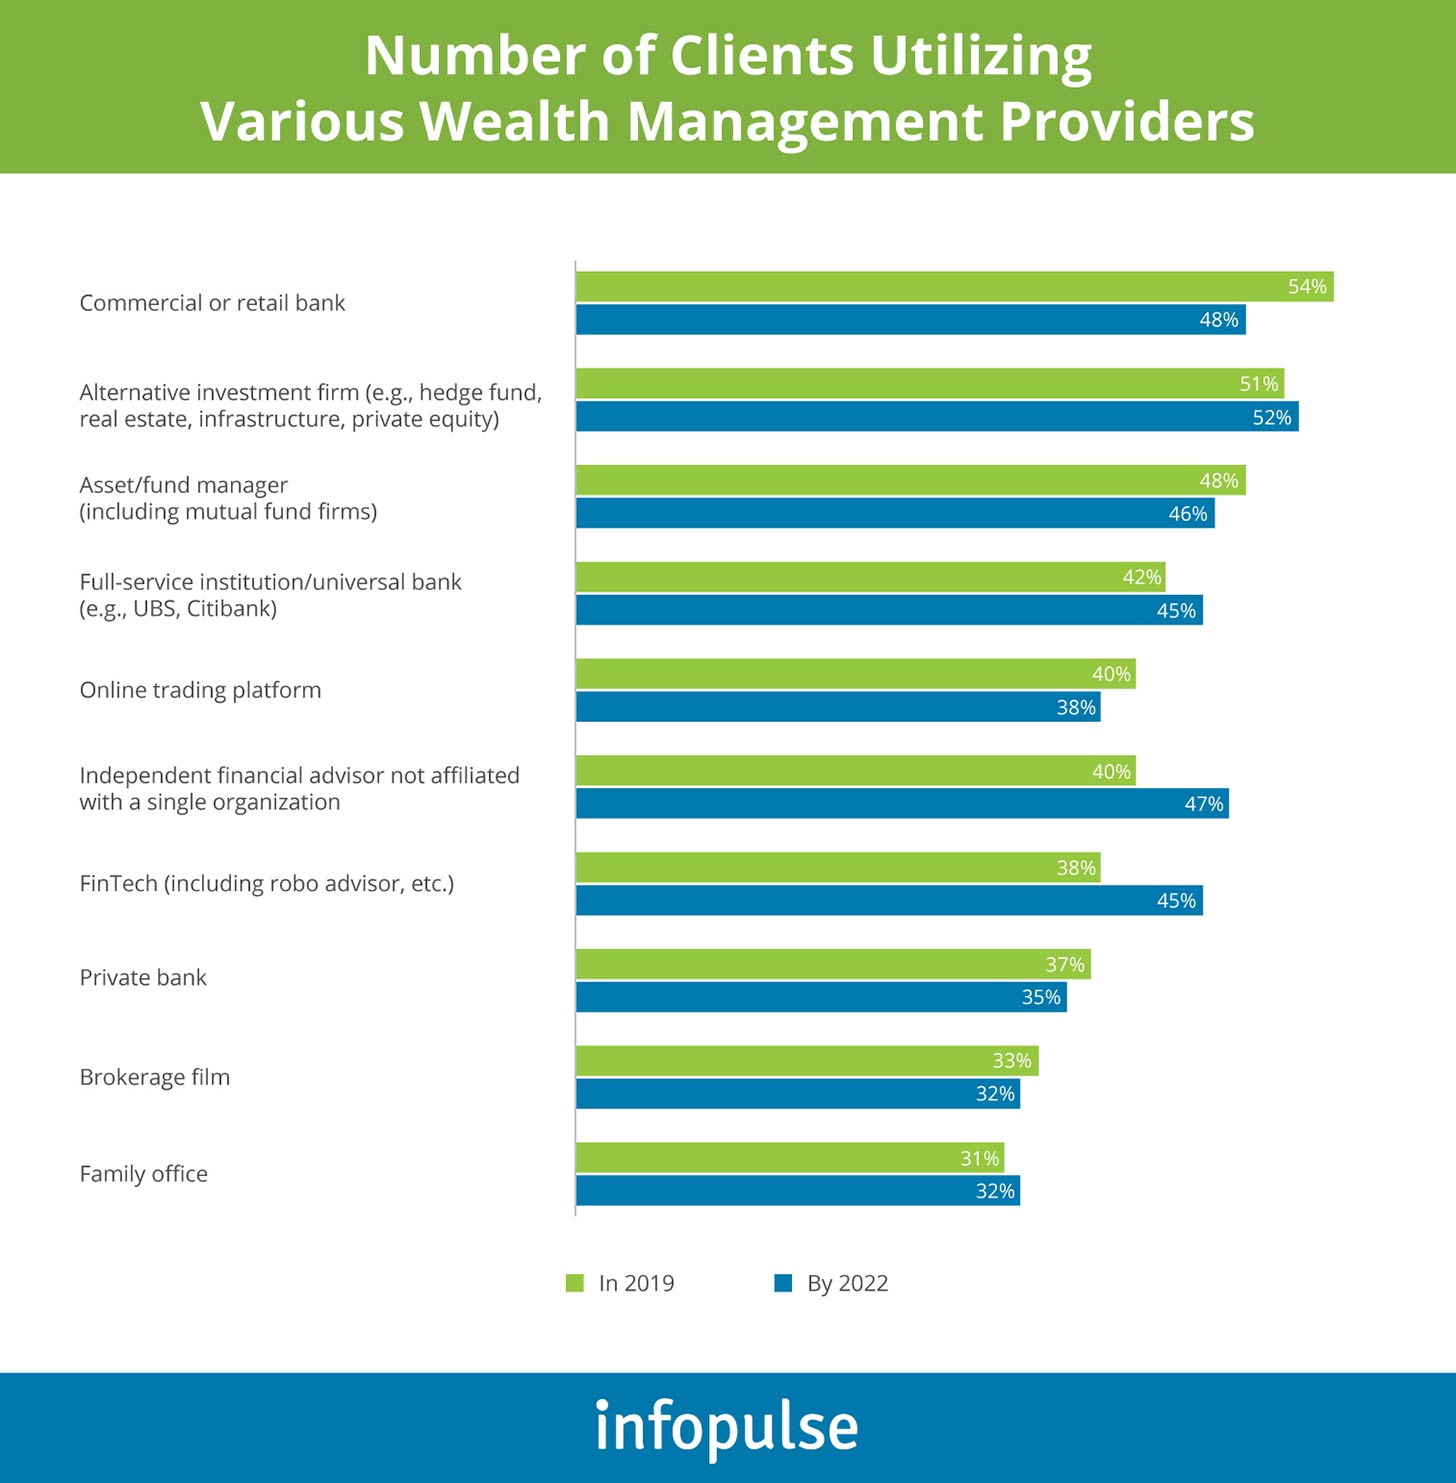 Number of Clients Utilizing Various Wealth Management Providers - Infopulse - 1